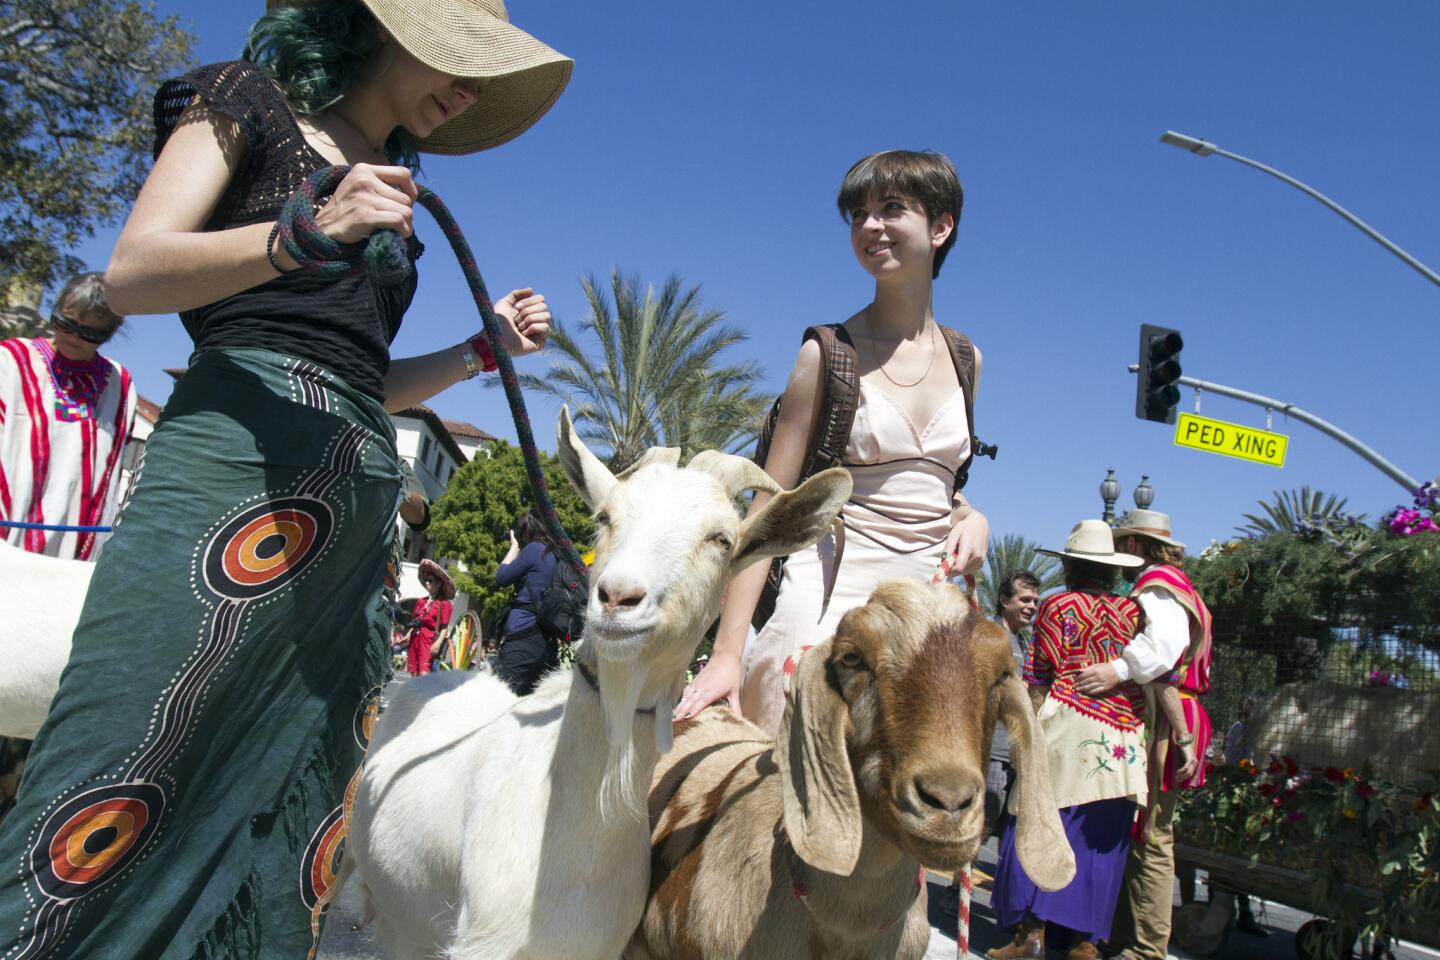 Julia Zorthian, left, and Lucia Zezza bring animals from Zorthian Ranch to an annual Blessing of the Animals, which took place at Olvera Street on Saturday.